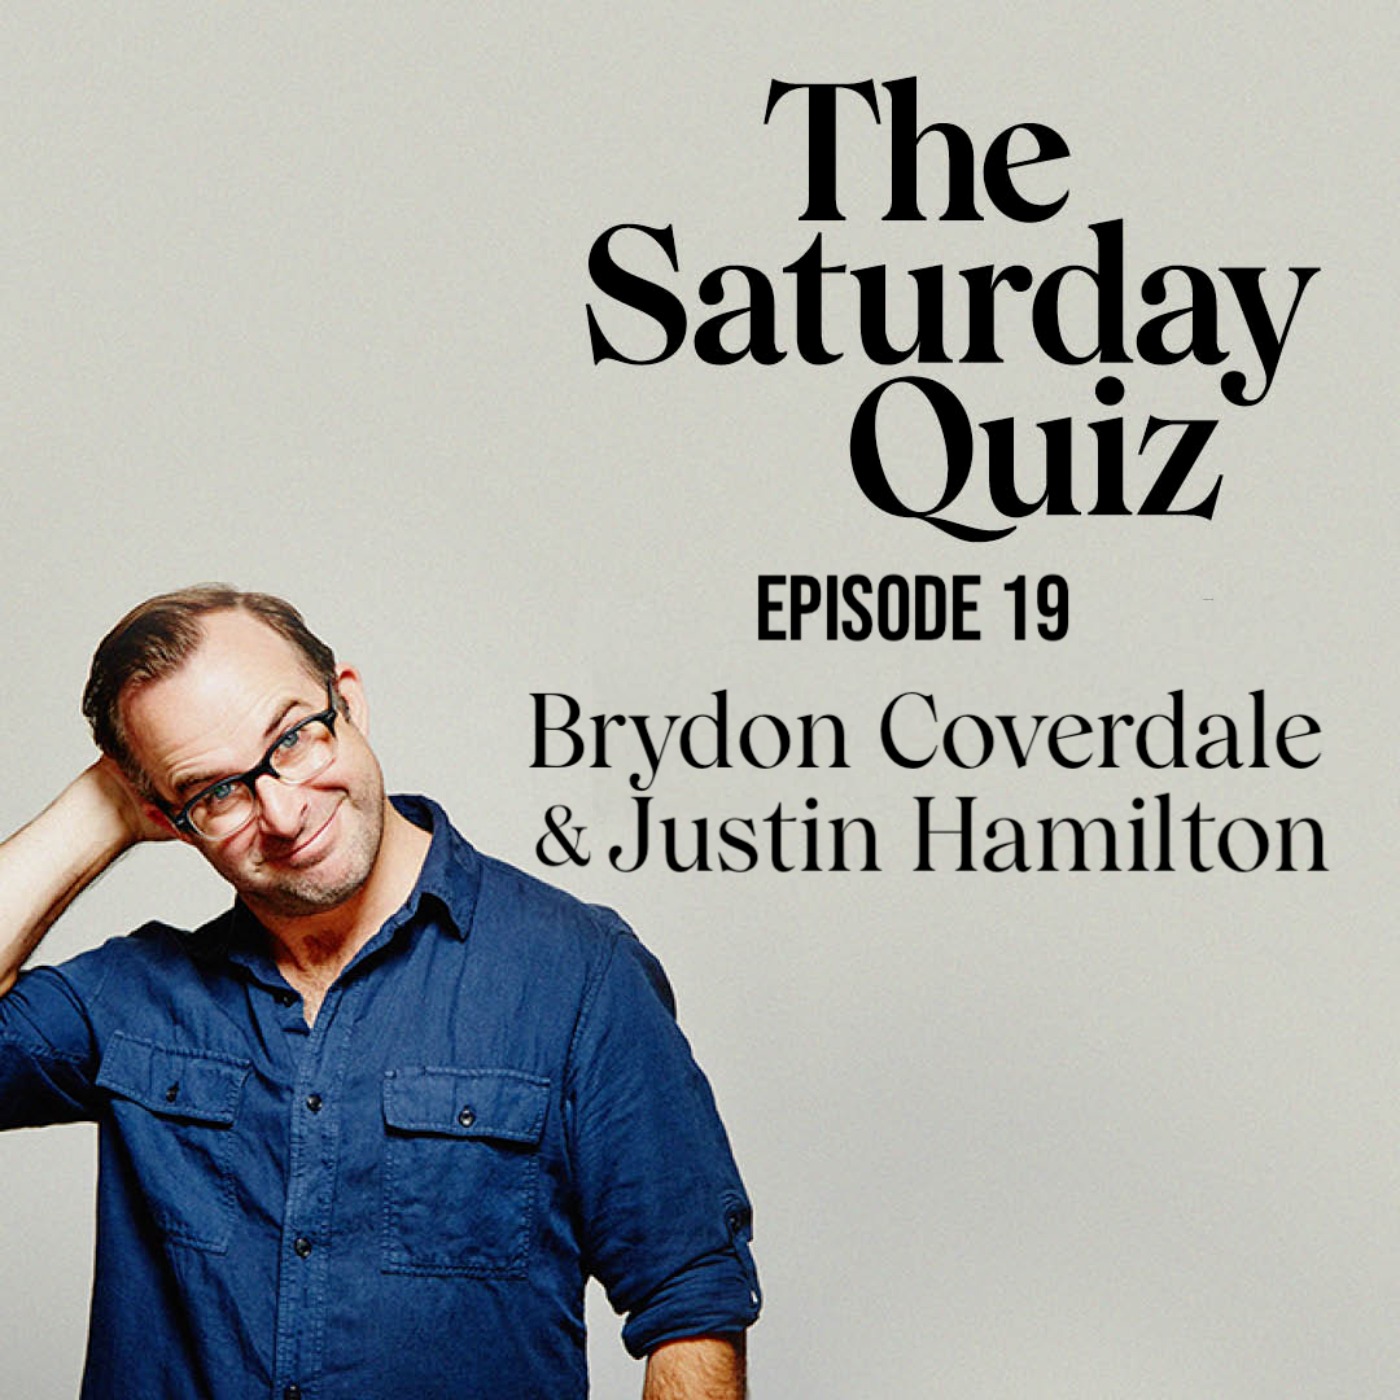 The Professional with Brydon Coverdale and Justin Hamilton